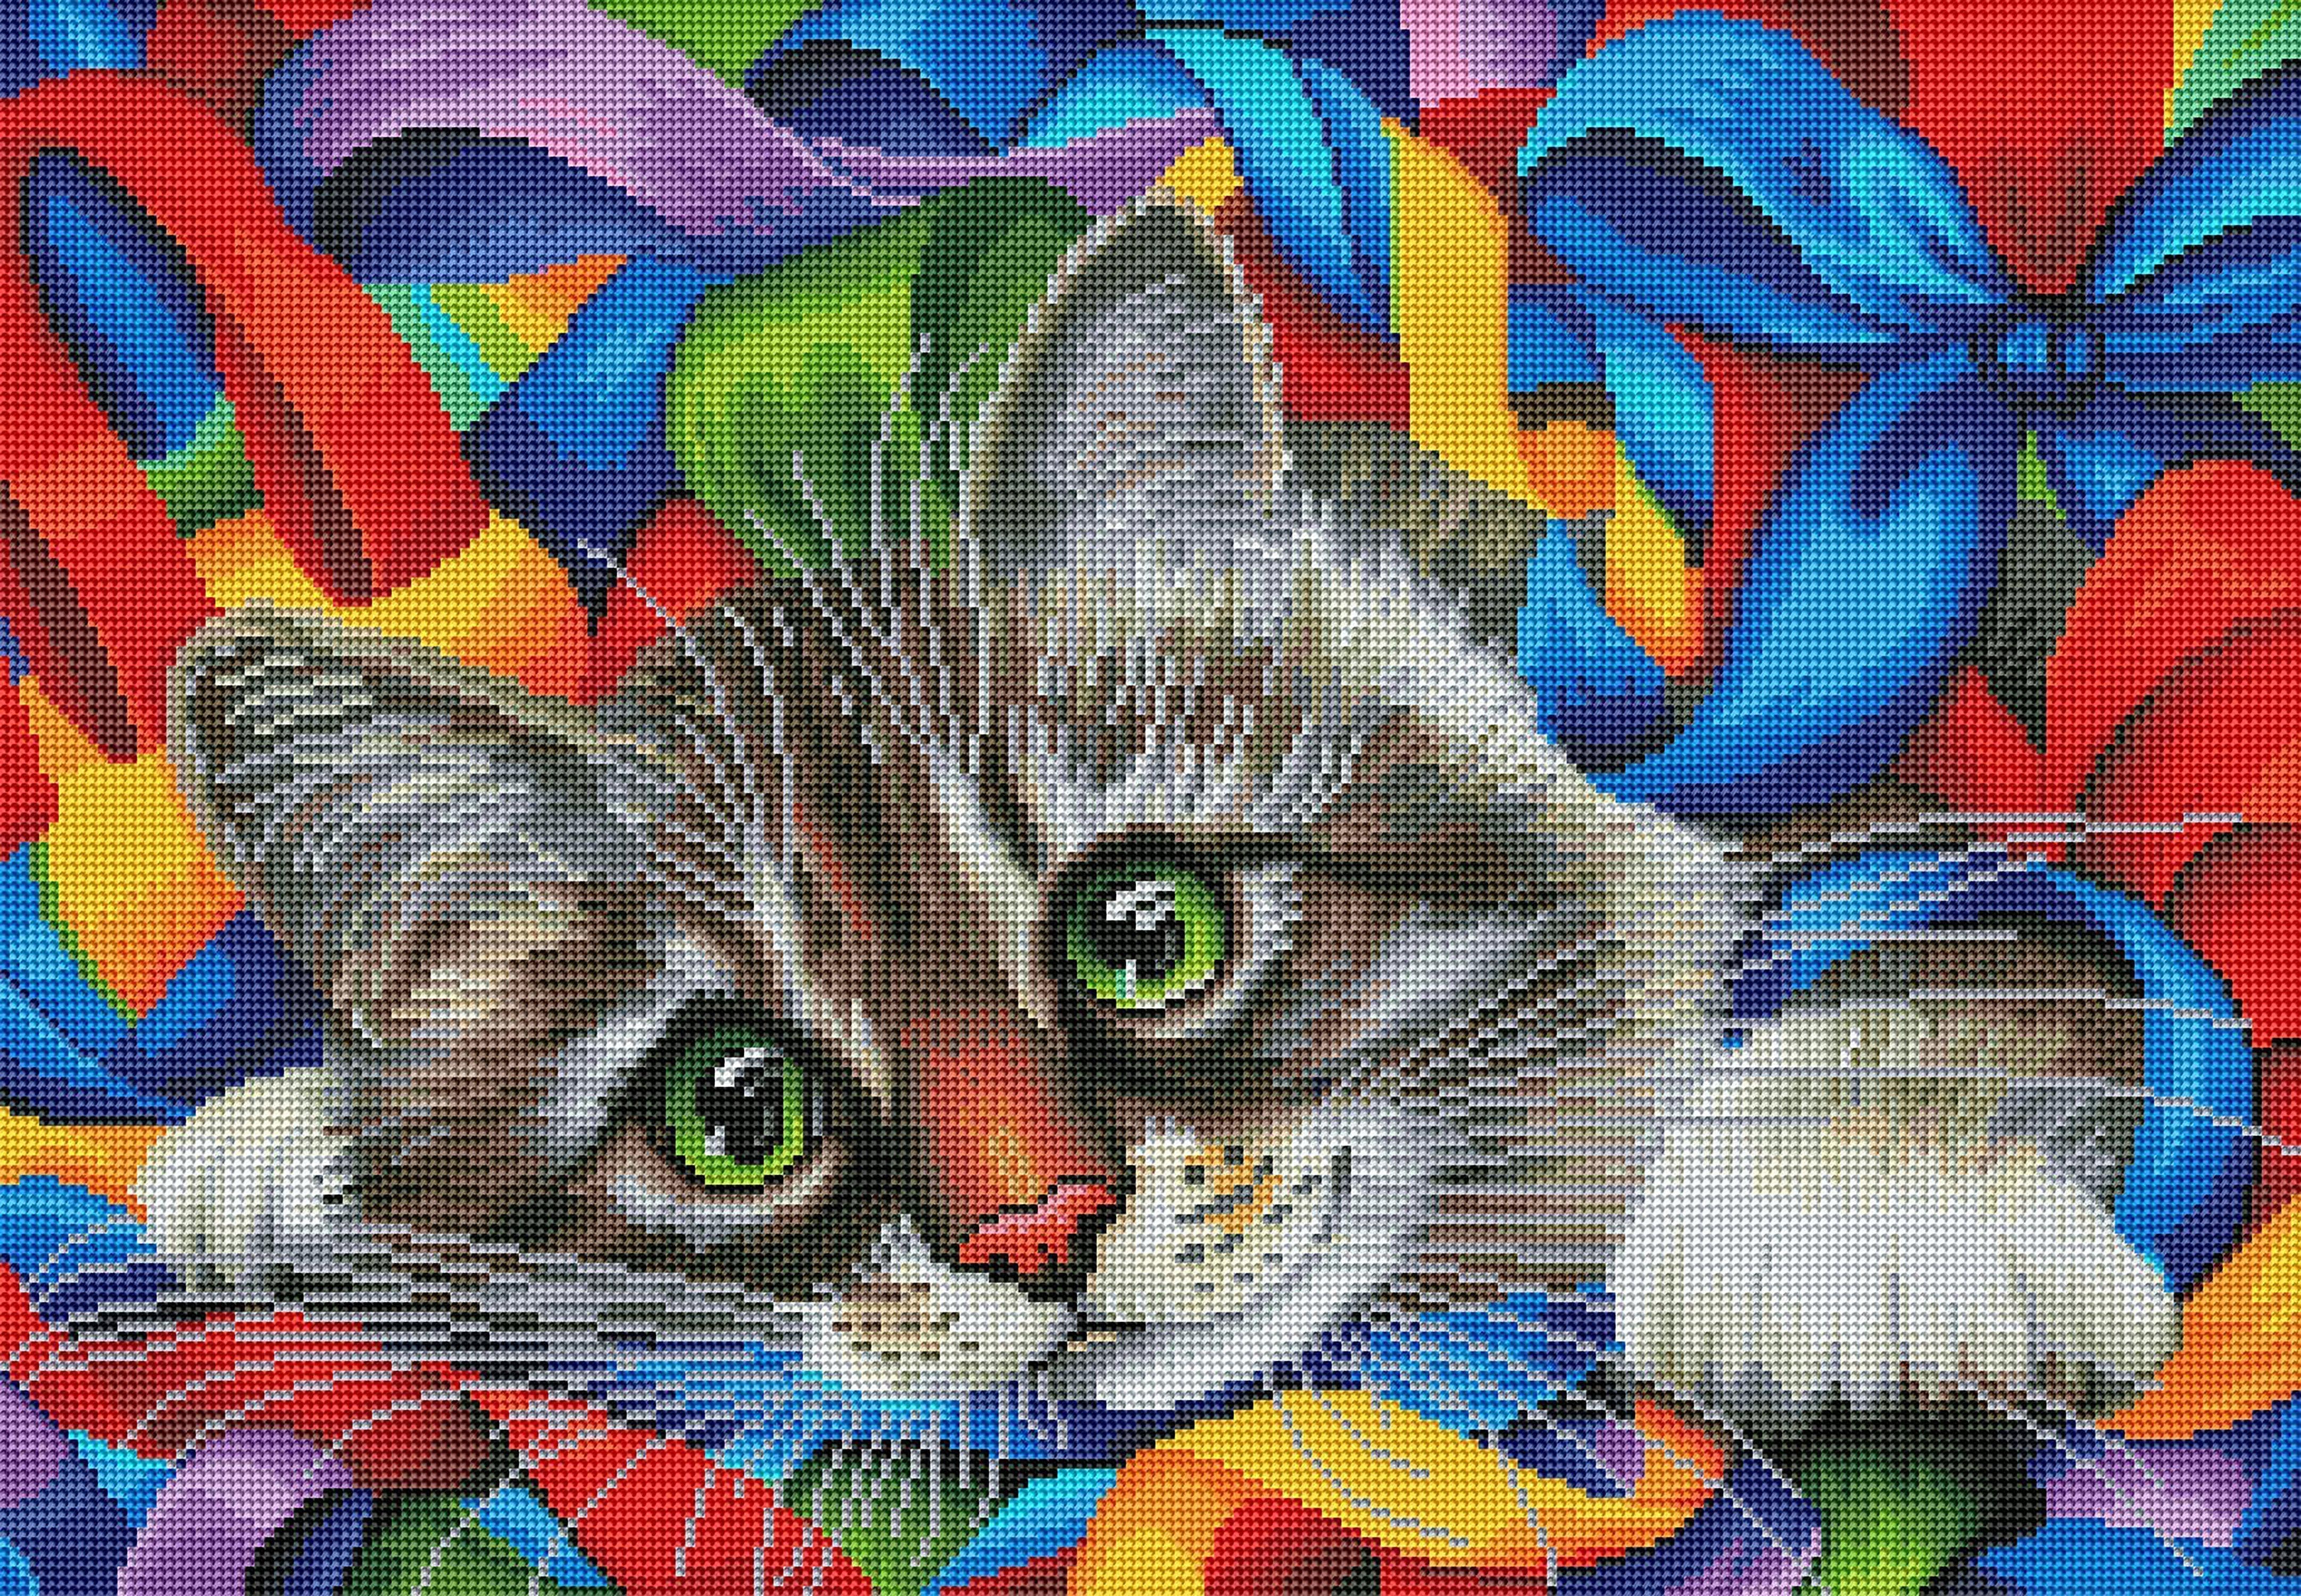 Cat with the Rainbow From Crafting Spark - Diamond Painting - Kits